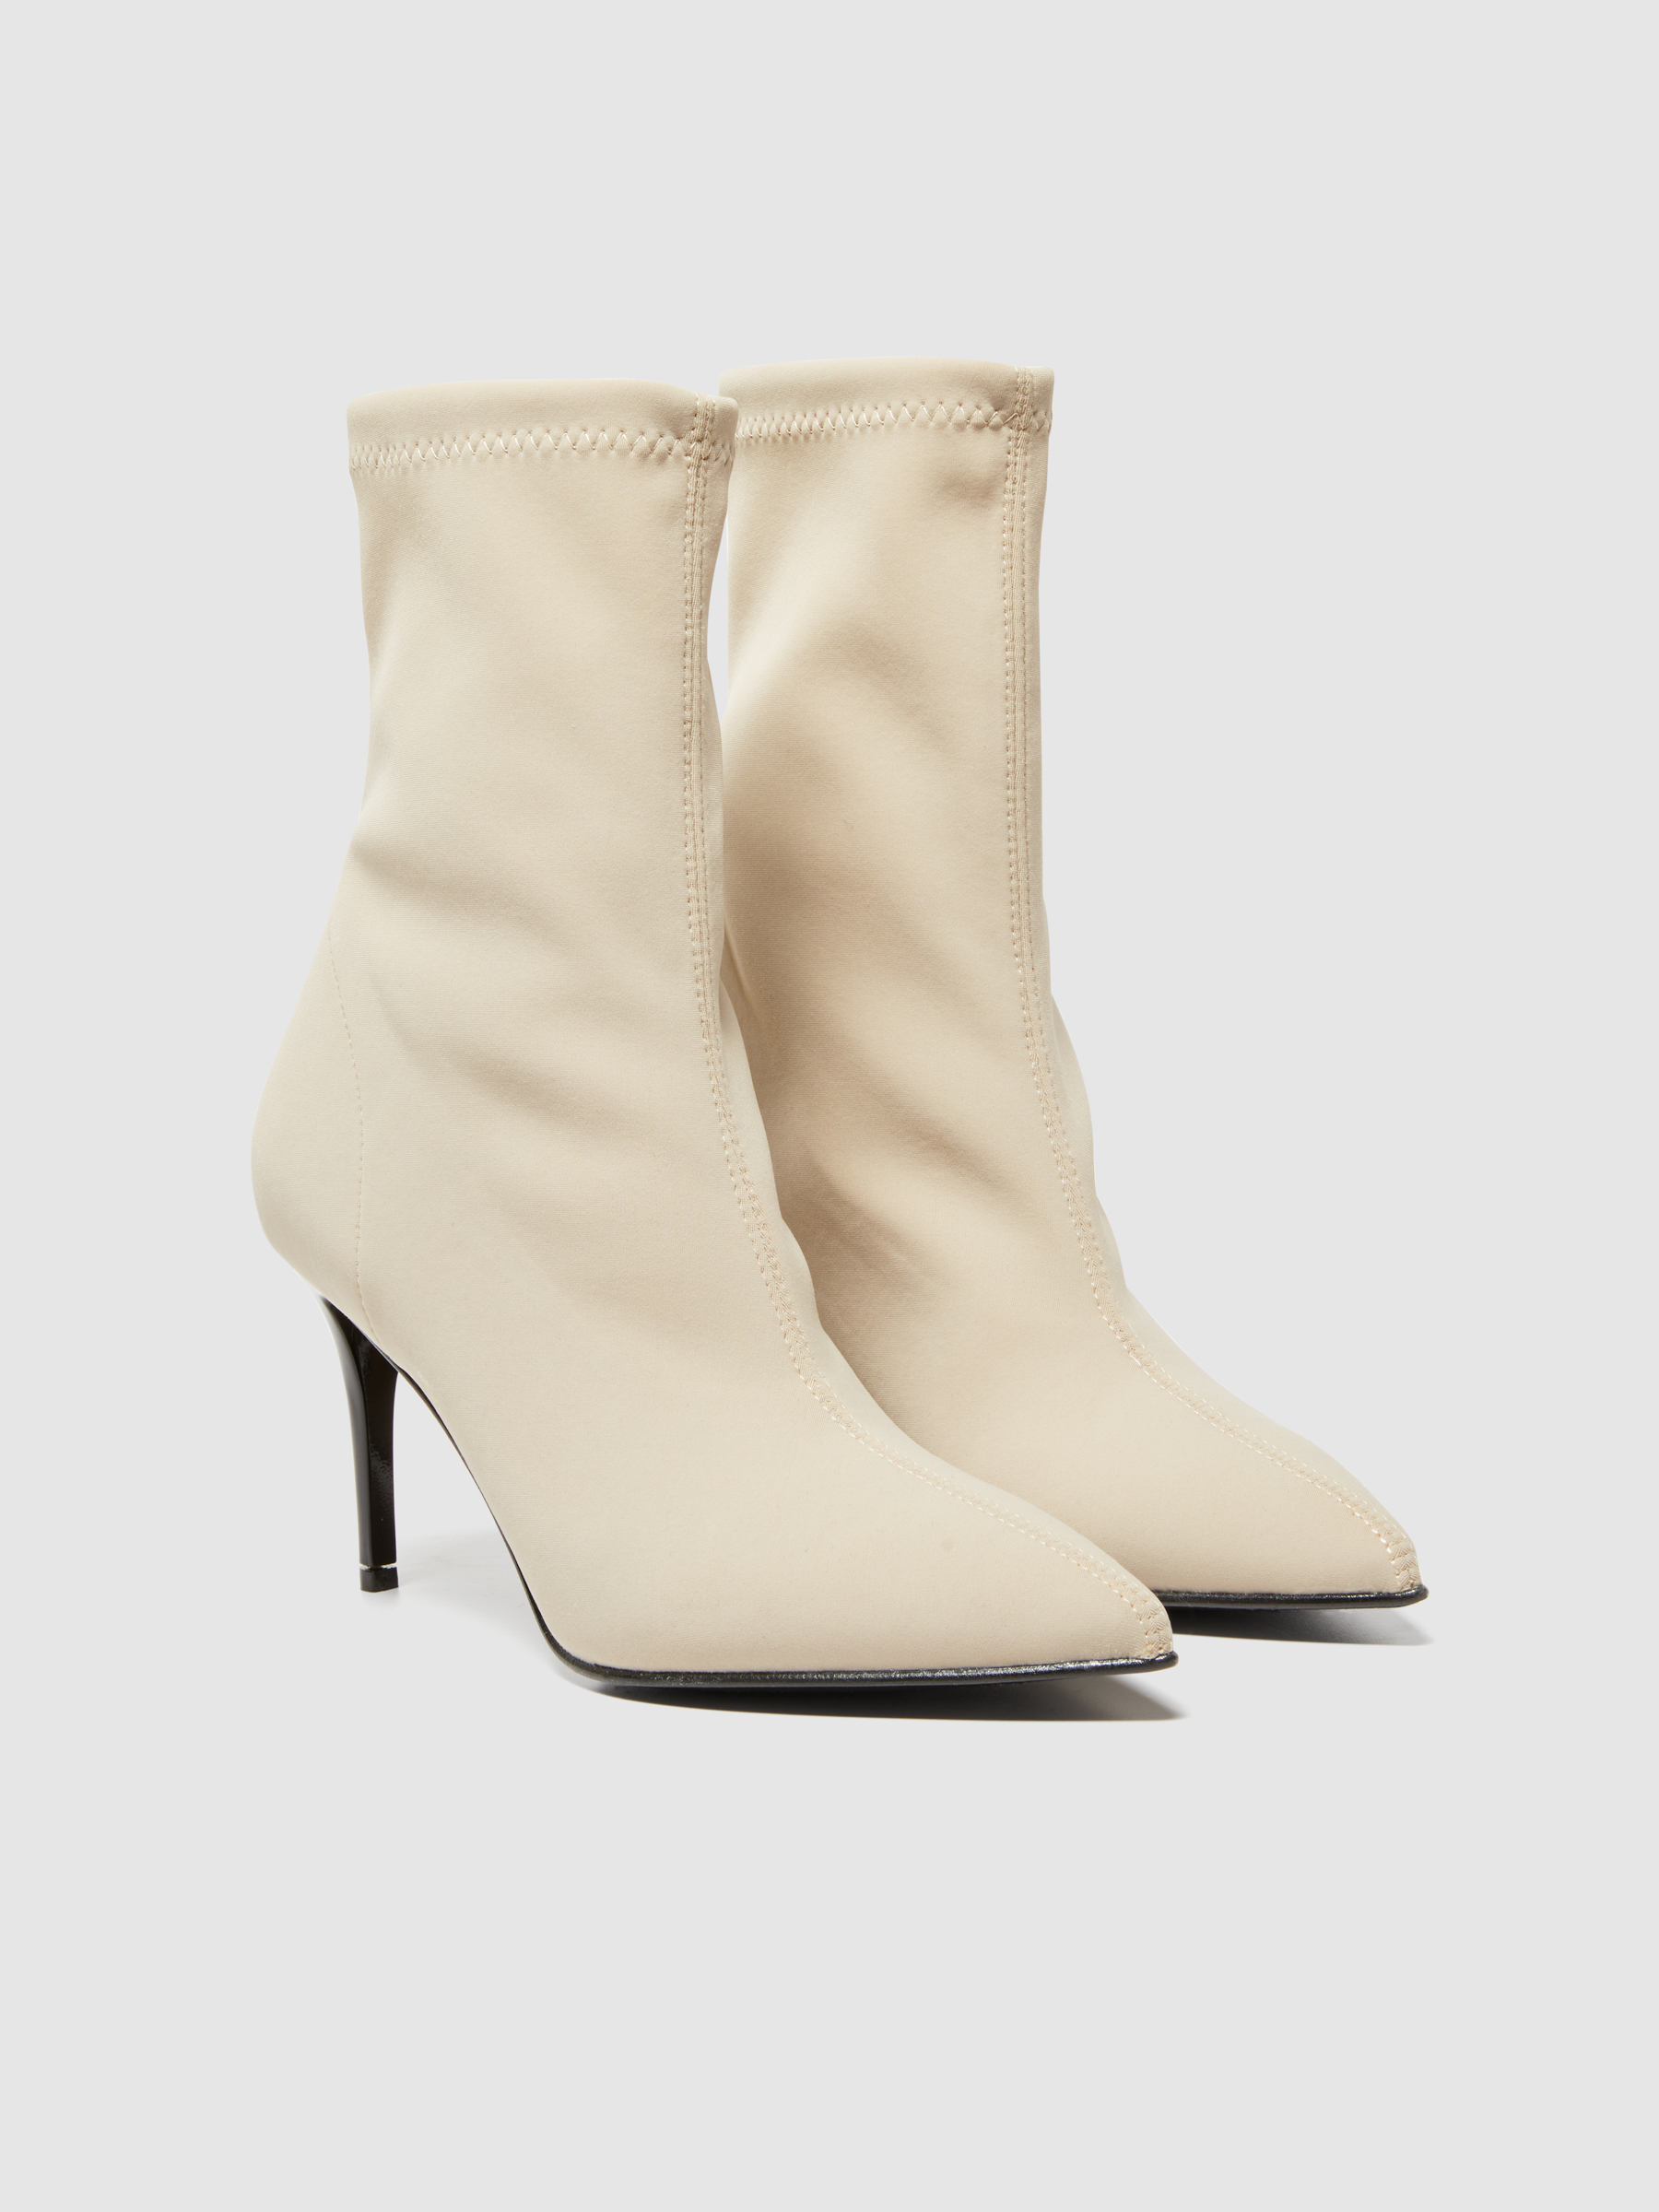 Sisley - Sock Ankle Boots, Woman, Creamy White, Size: 39